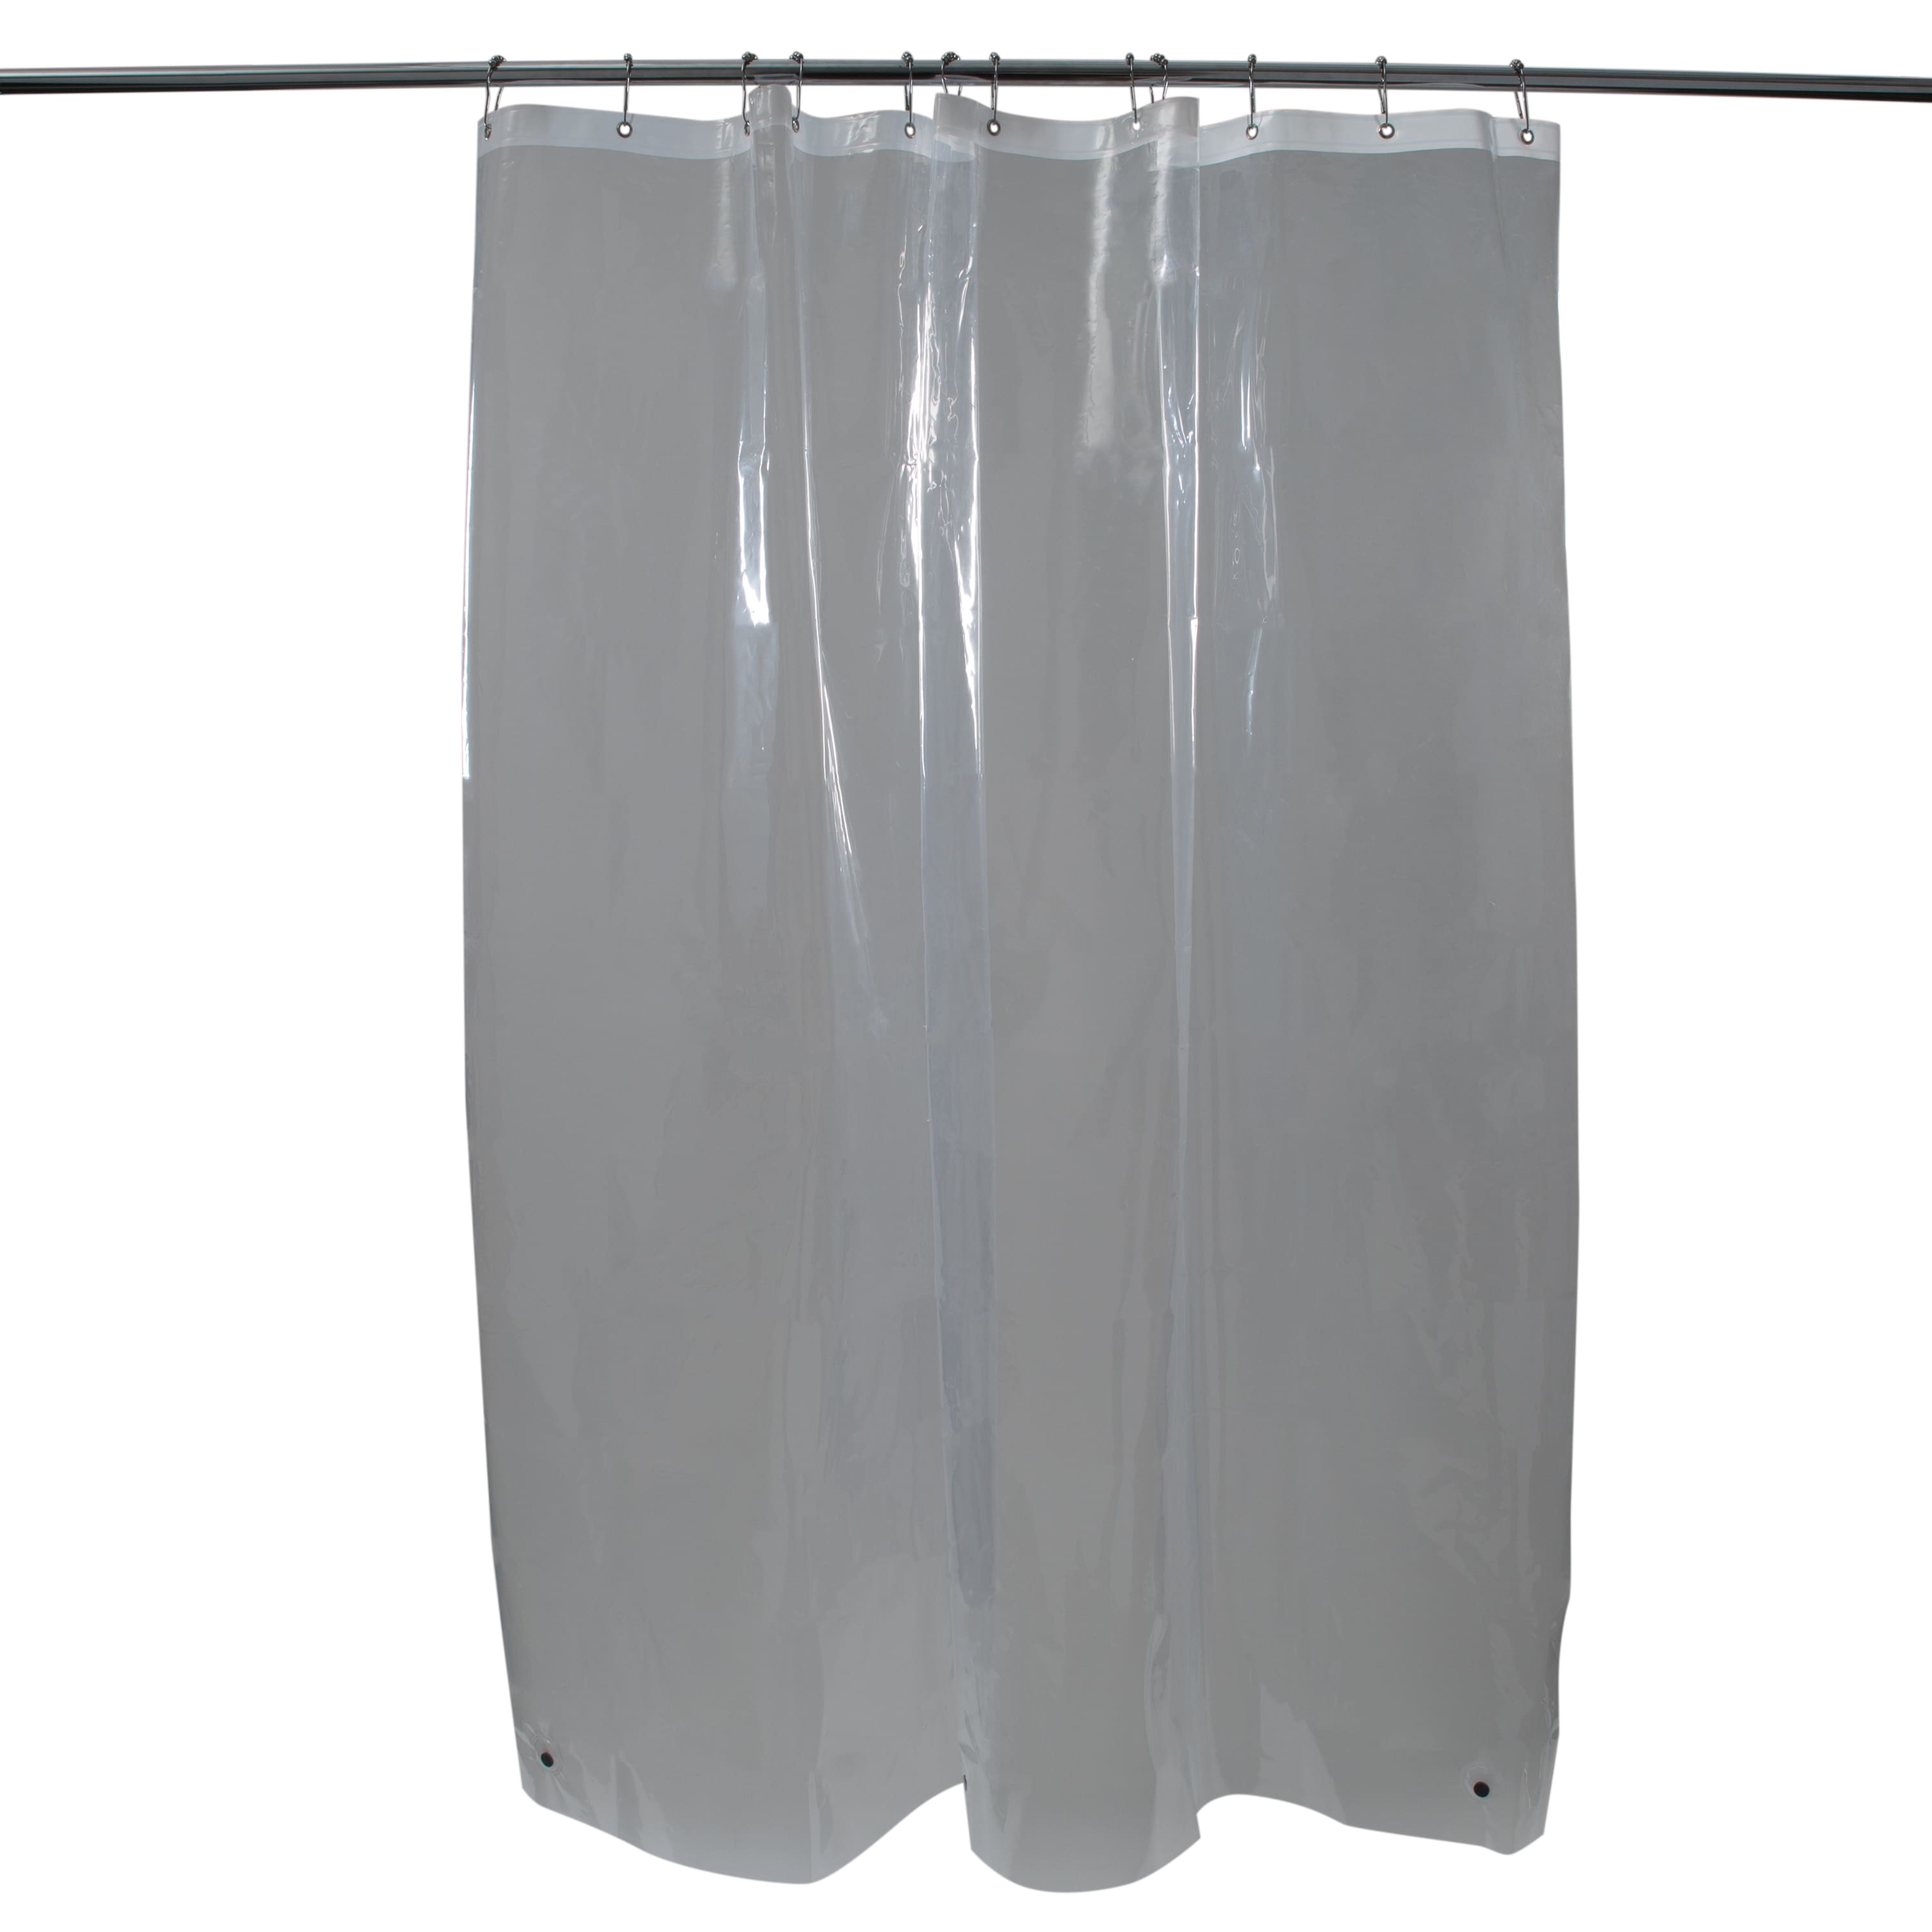 Goodears Clear Shower Curtain, Waterproof Shower Curtain Liner Plastic PEVA  with No Hooks,72x74 Inch,Washable